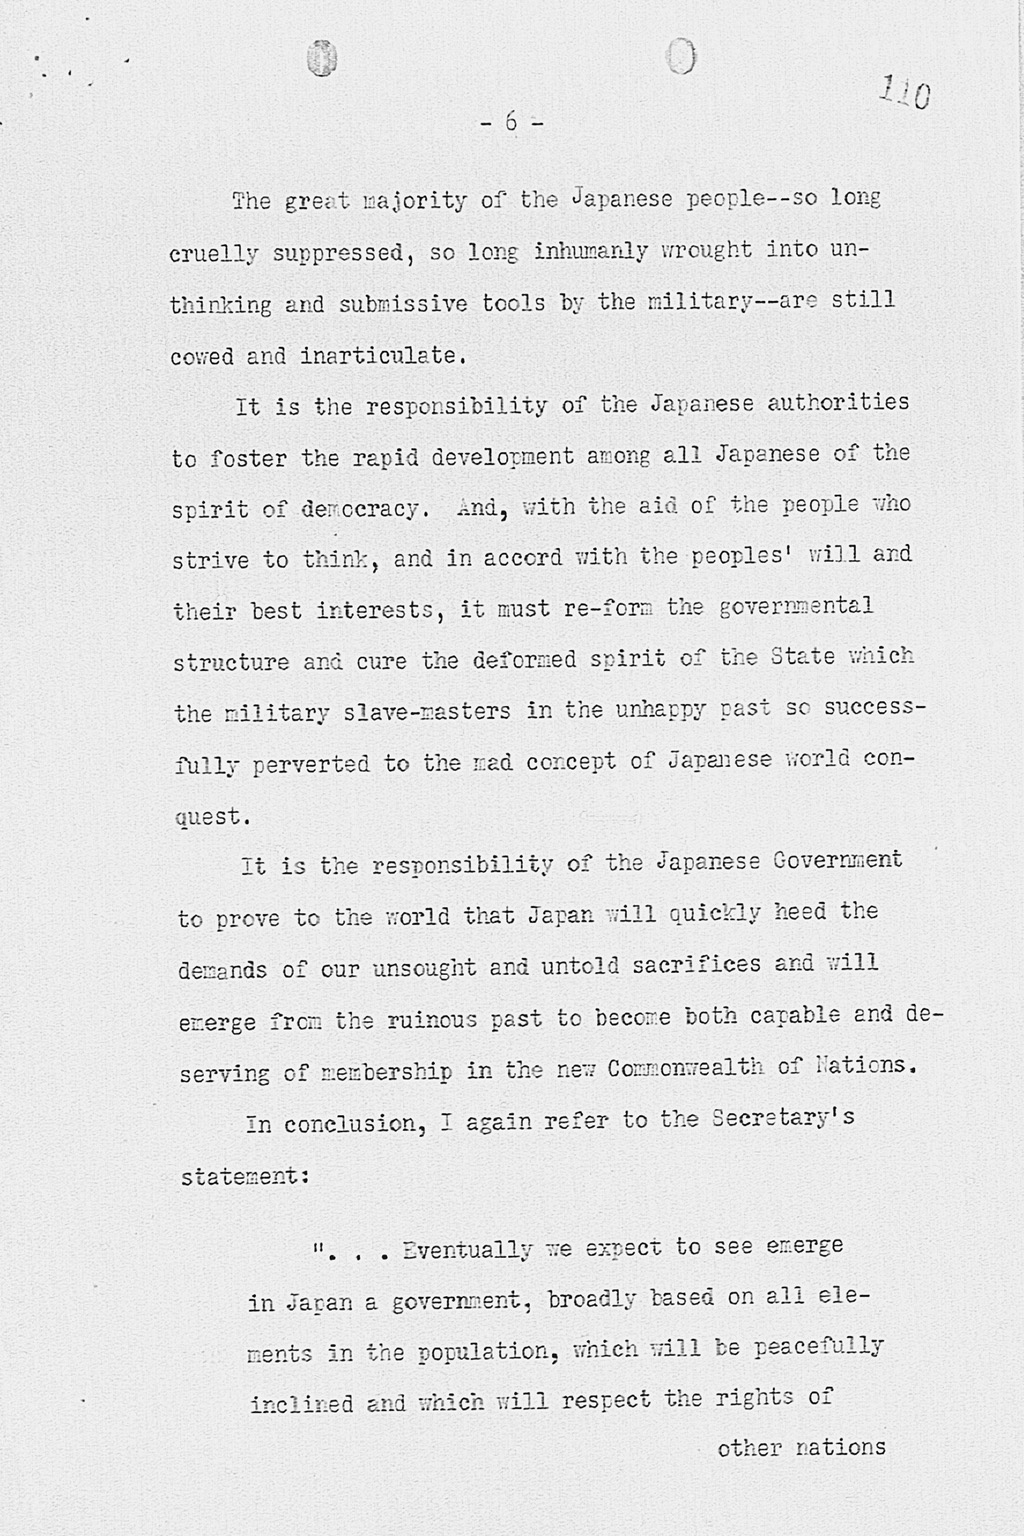 [Letter from George Atcheson, Jr. to Dean Acheson, Under Secretary of State dated November 7, 1945.](Larger image)